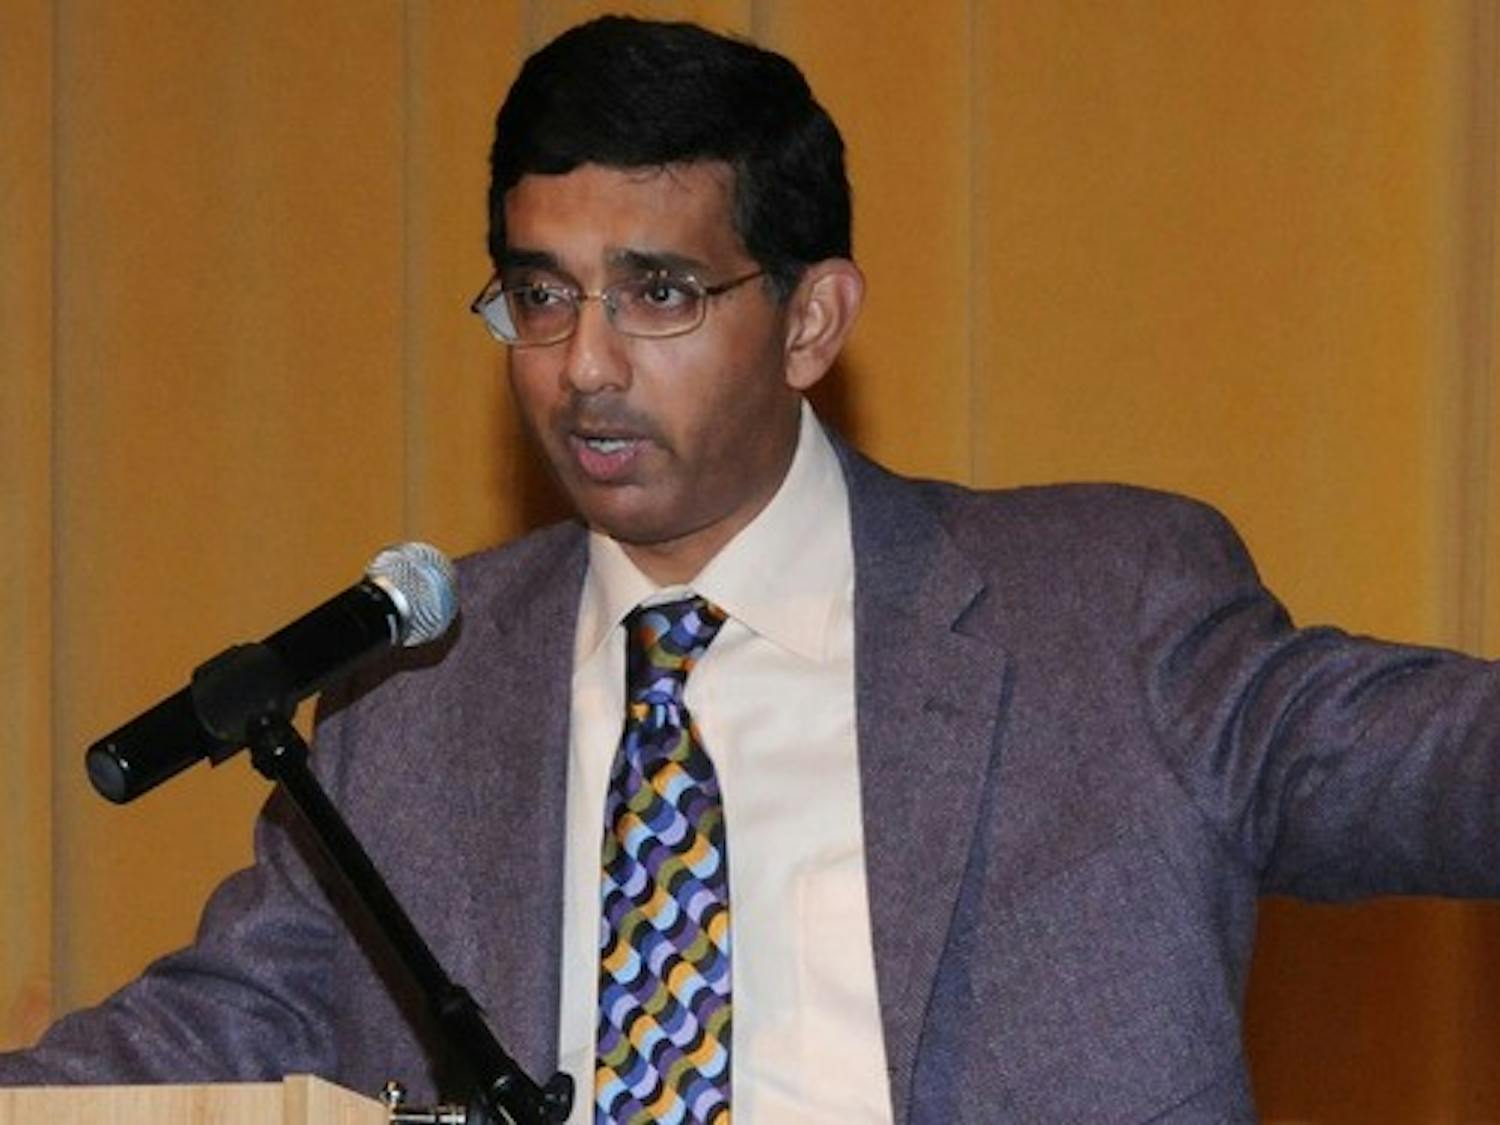 Conservative author and filmmaker Dinesh D'Souza '83 resigned as president of the King's College following allegations of an extramarital affair.